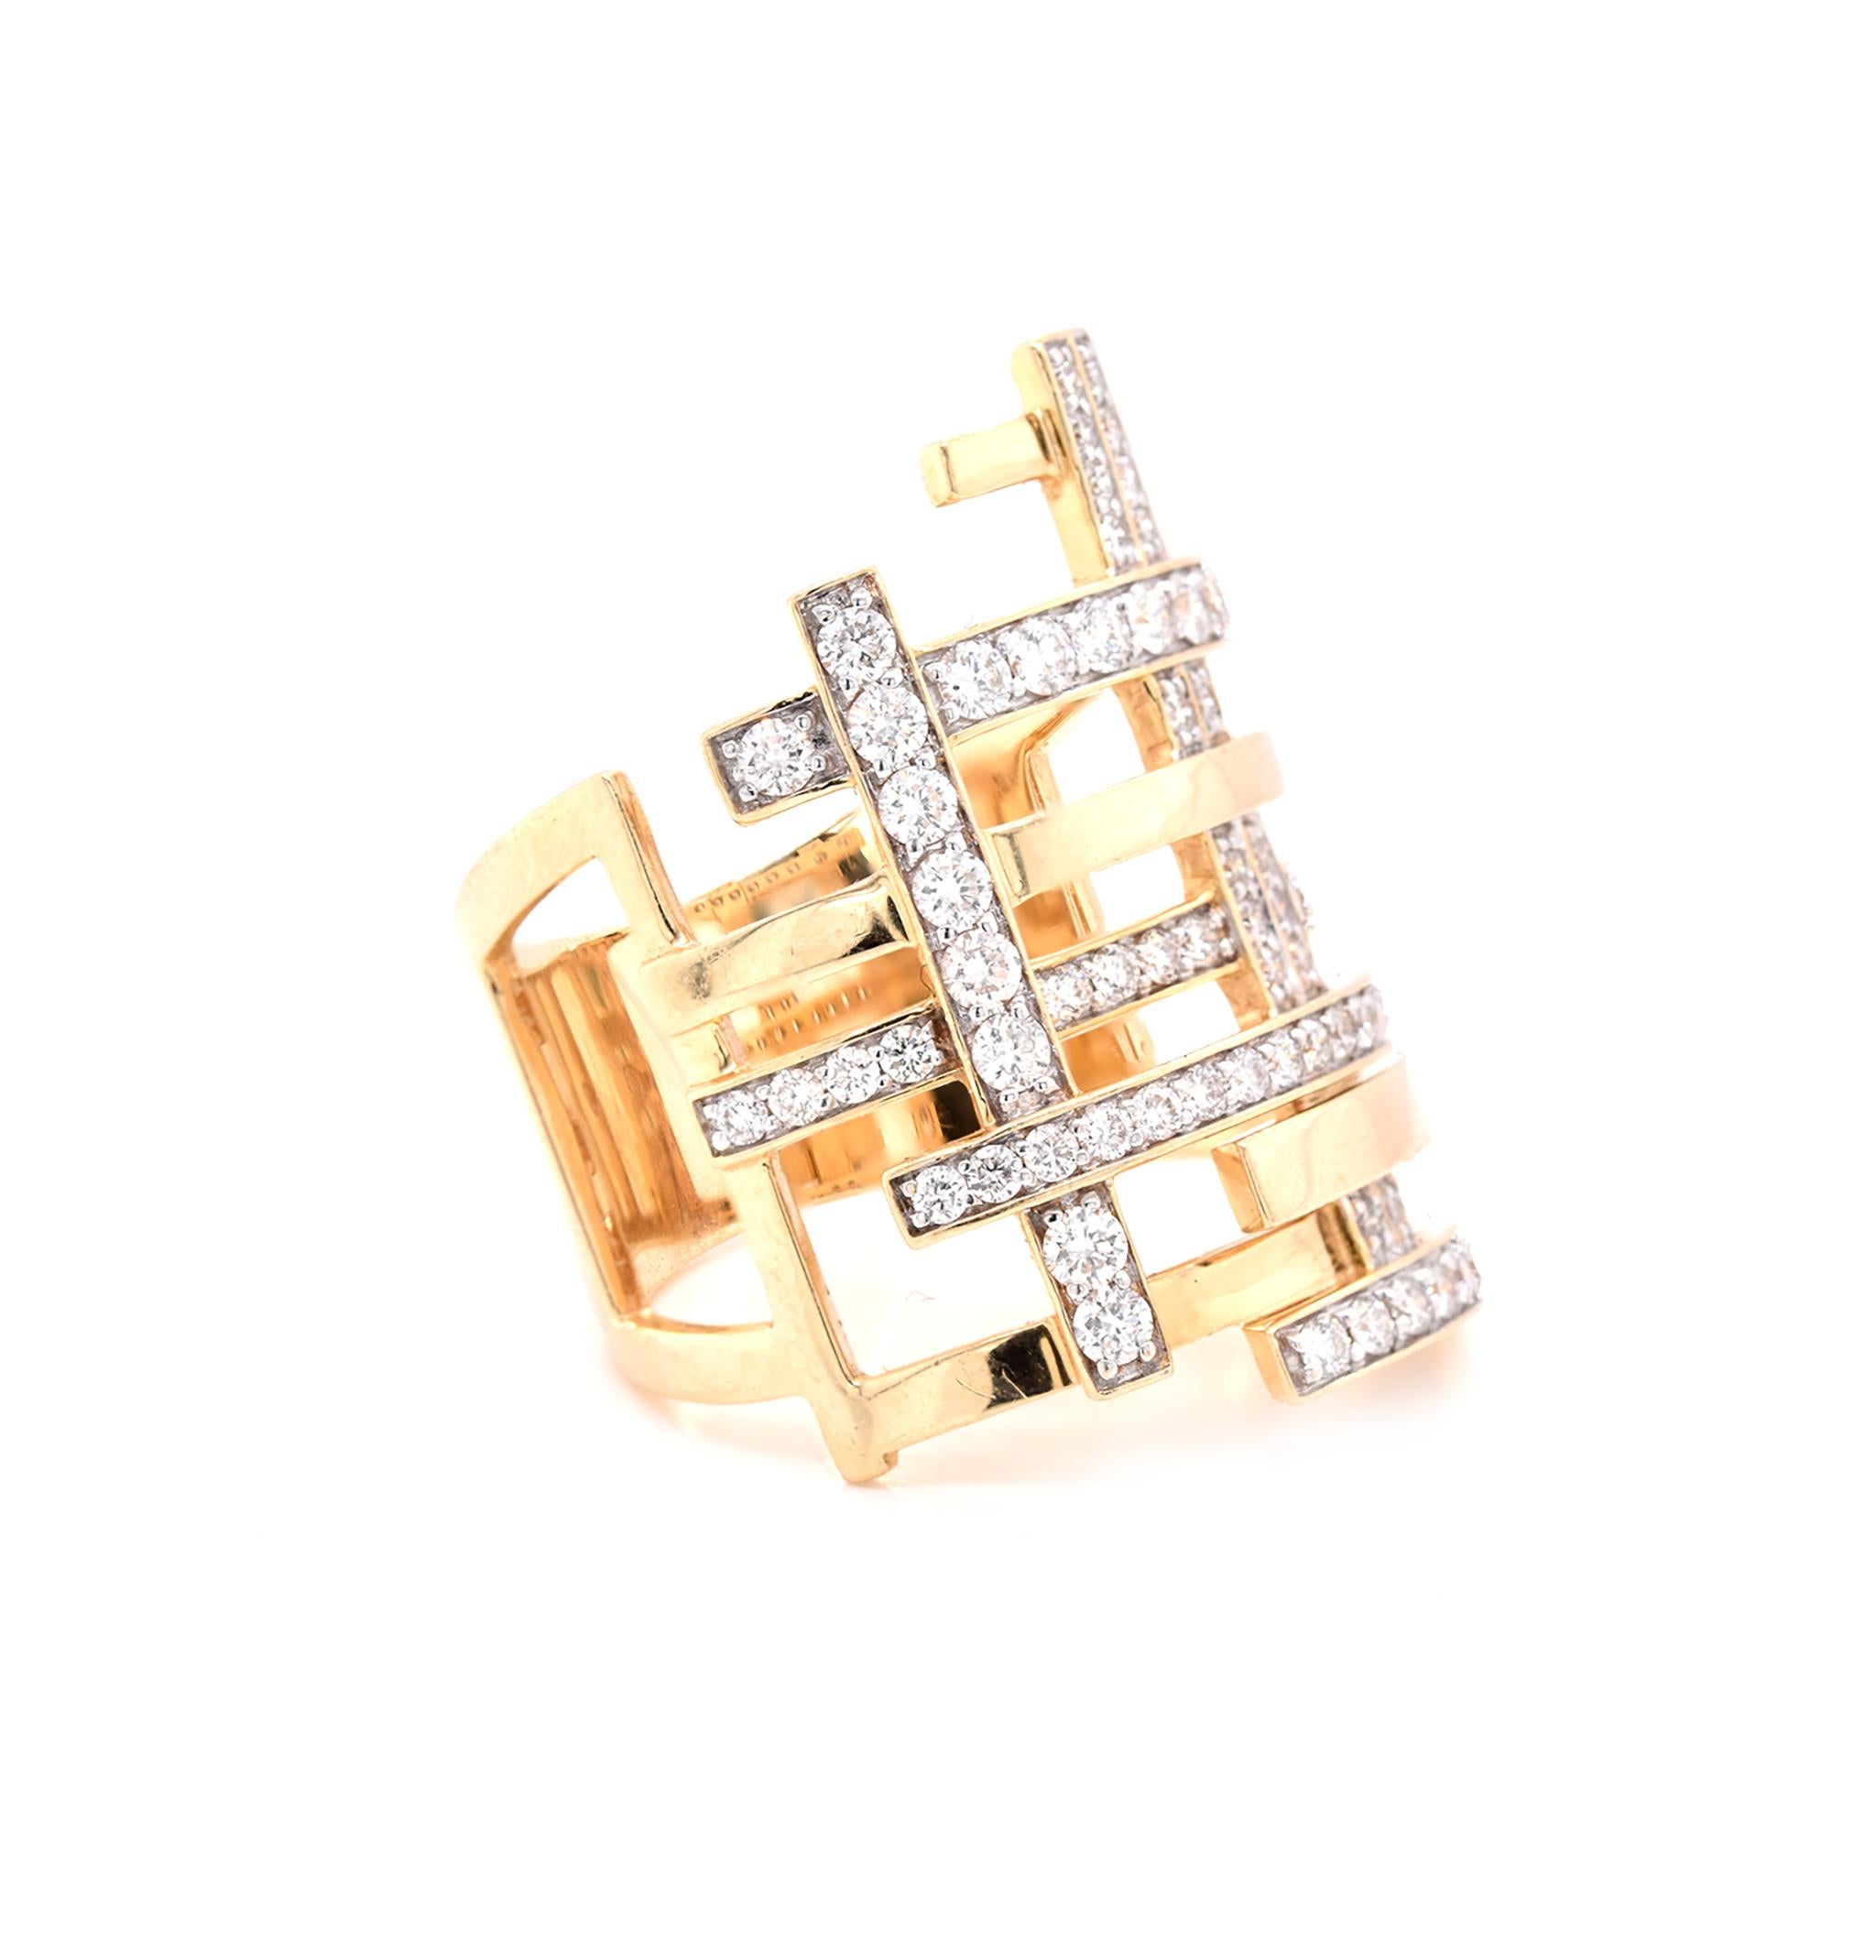 Designer: custom
Material: 14K yellow gold
Diamonds: 71 round cut = 1.00cttw
Color: G
Clarity: VS
Ring Size: 7 (Please allow up to two additional business days for sizing requests)
Dimensions: ring top measures 26.35mm wide  
Weight: 9.45 grams